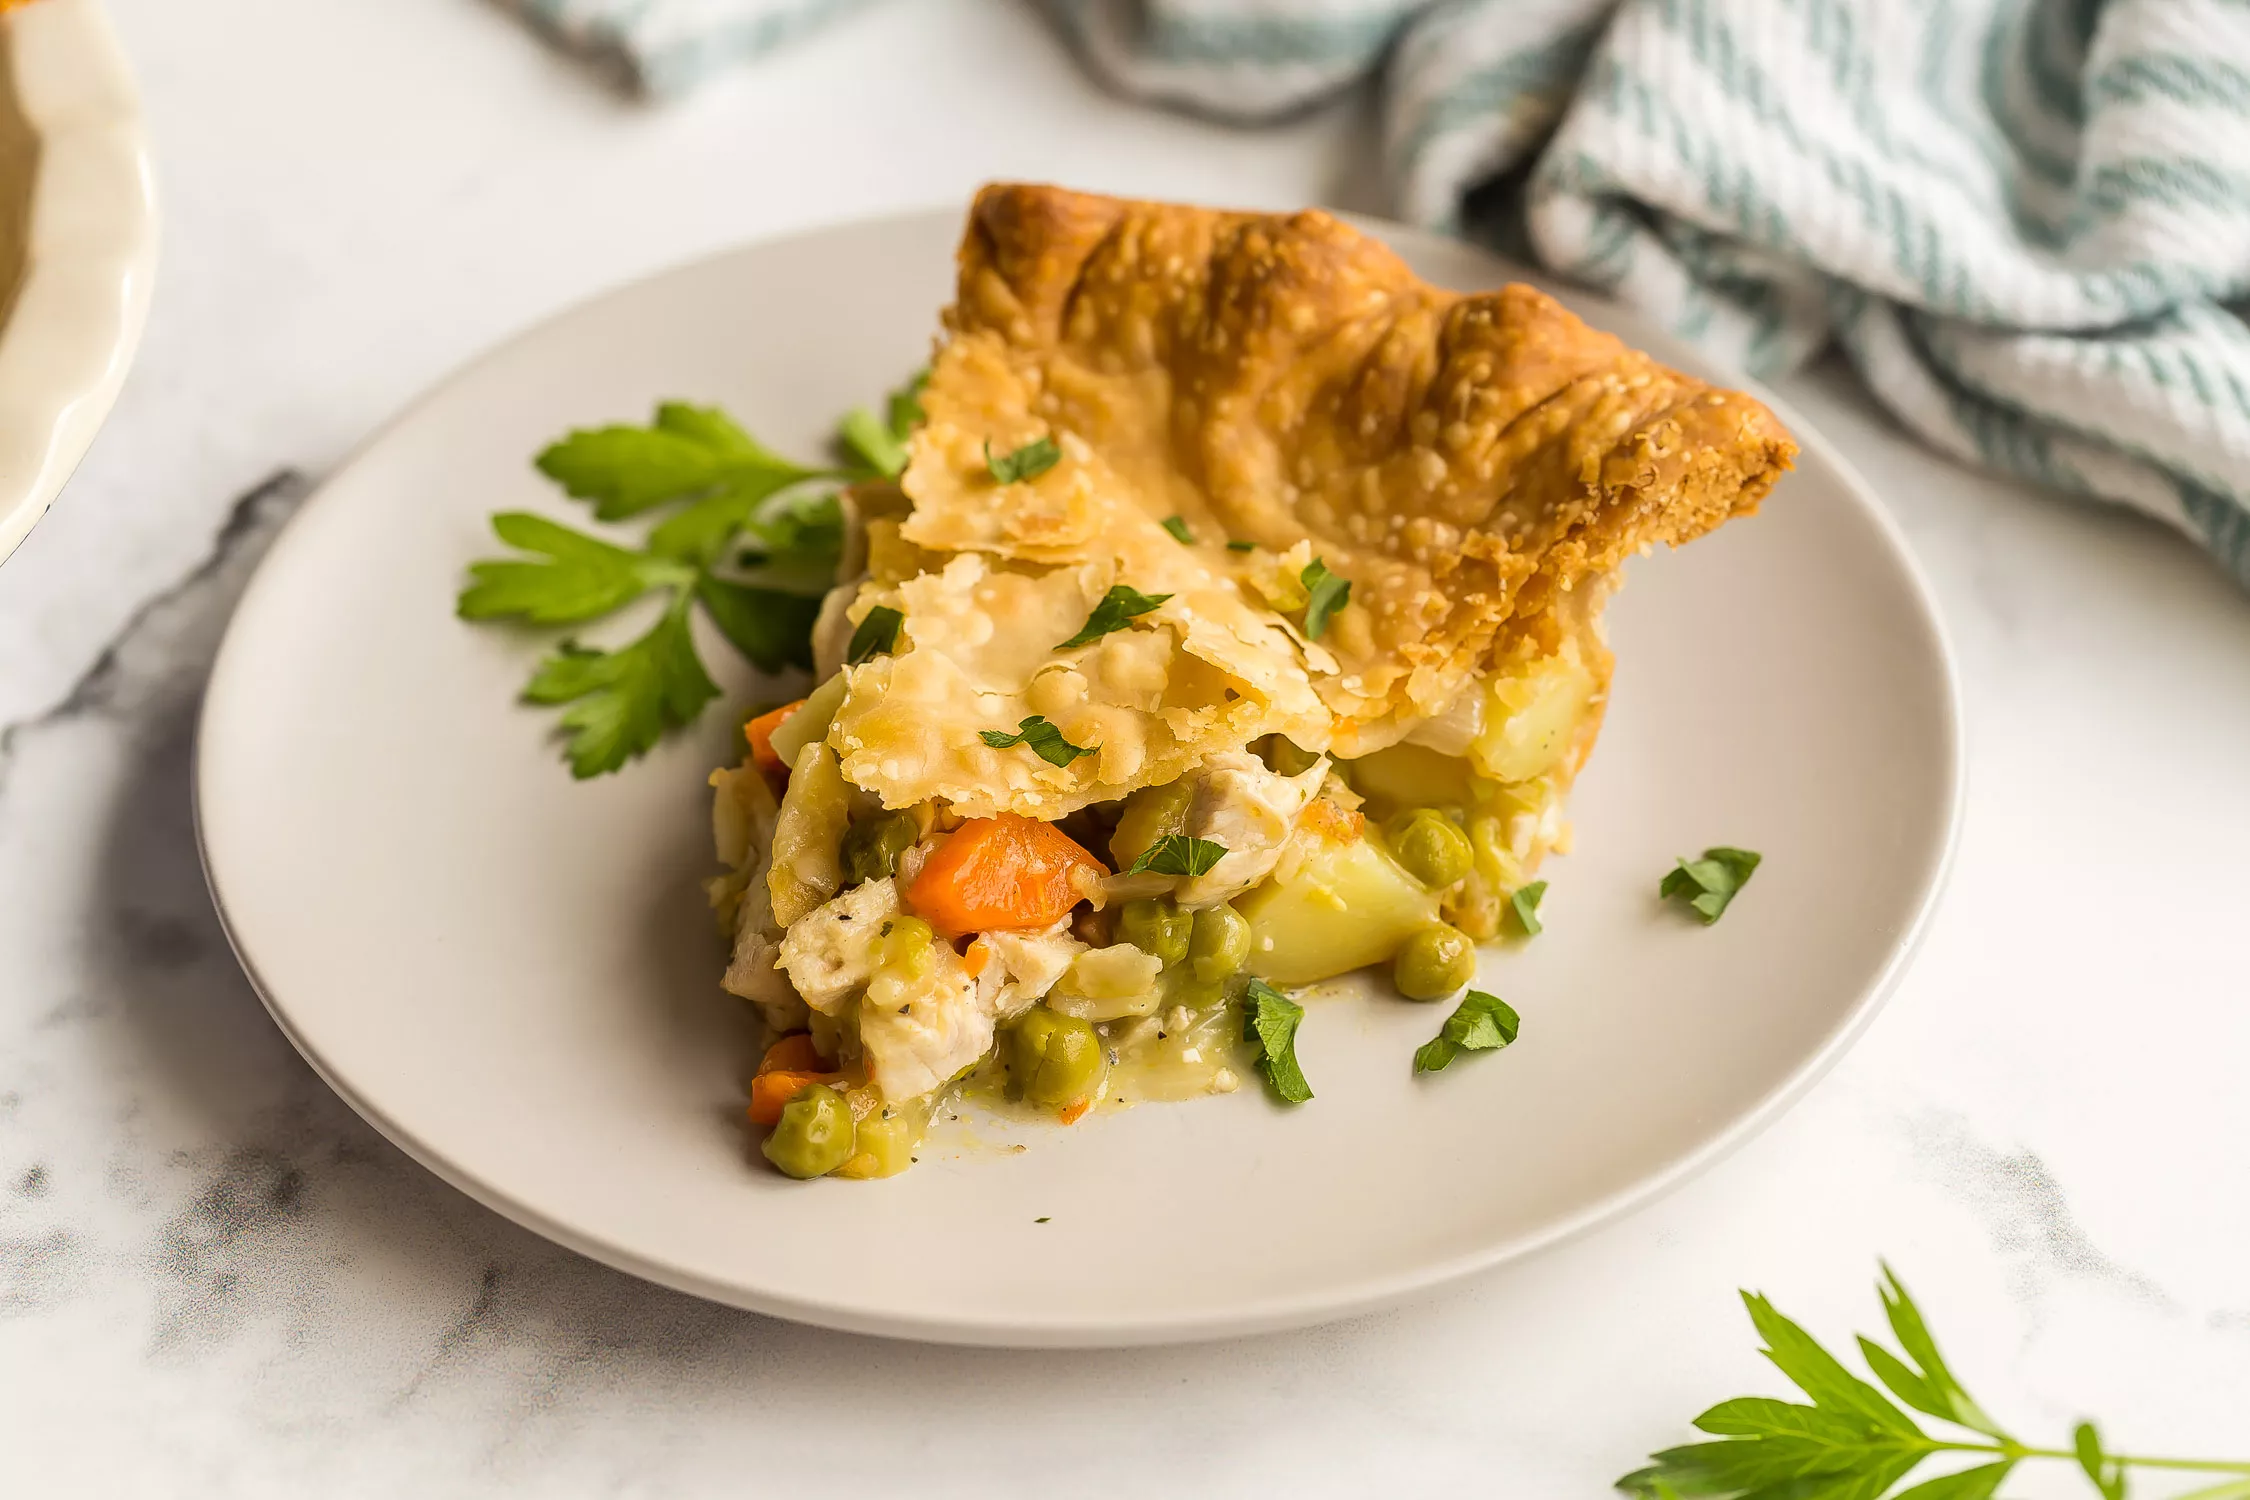 A slice of hearty chicken pot pie.